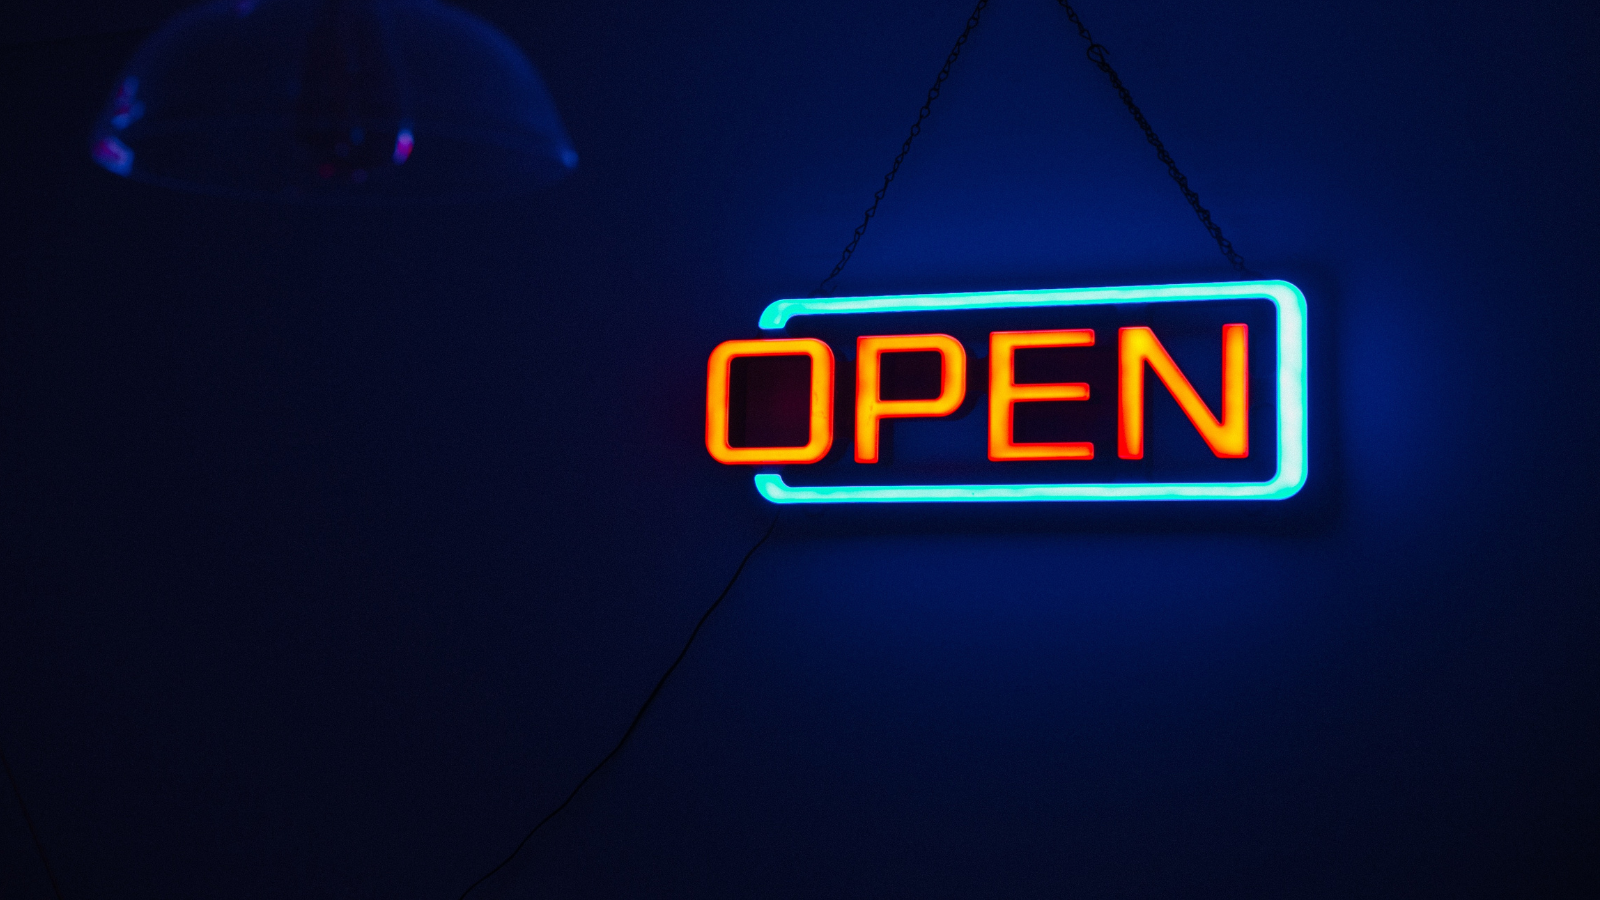 A neon "open" sign often seen outside businesses glows in the corner of a dark room